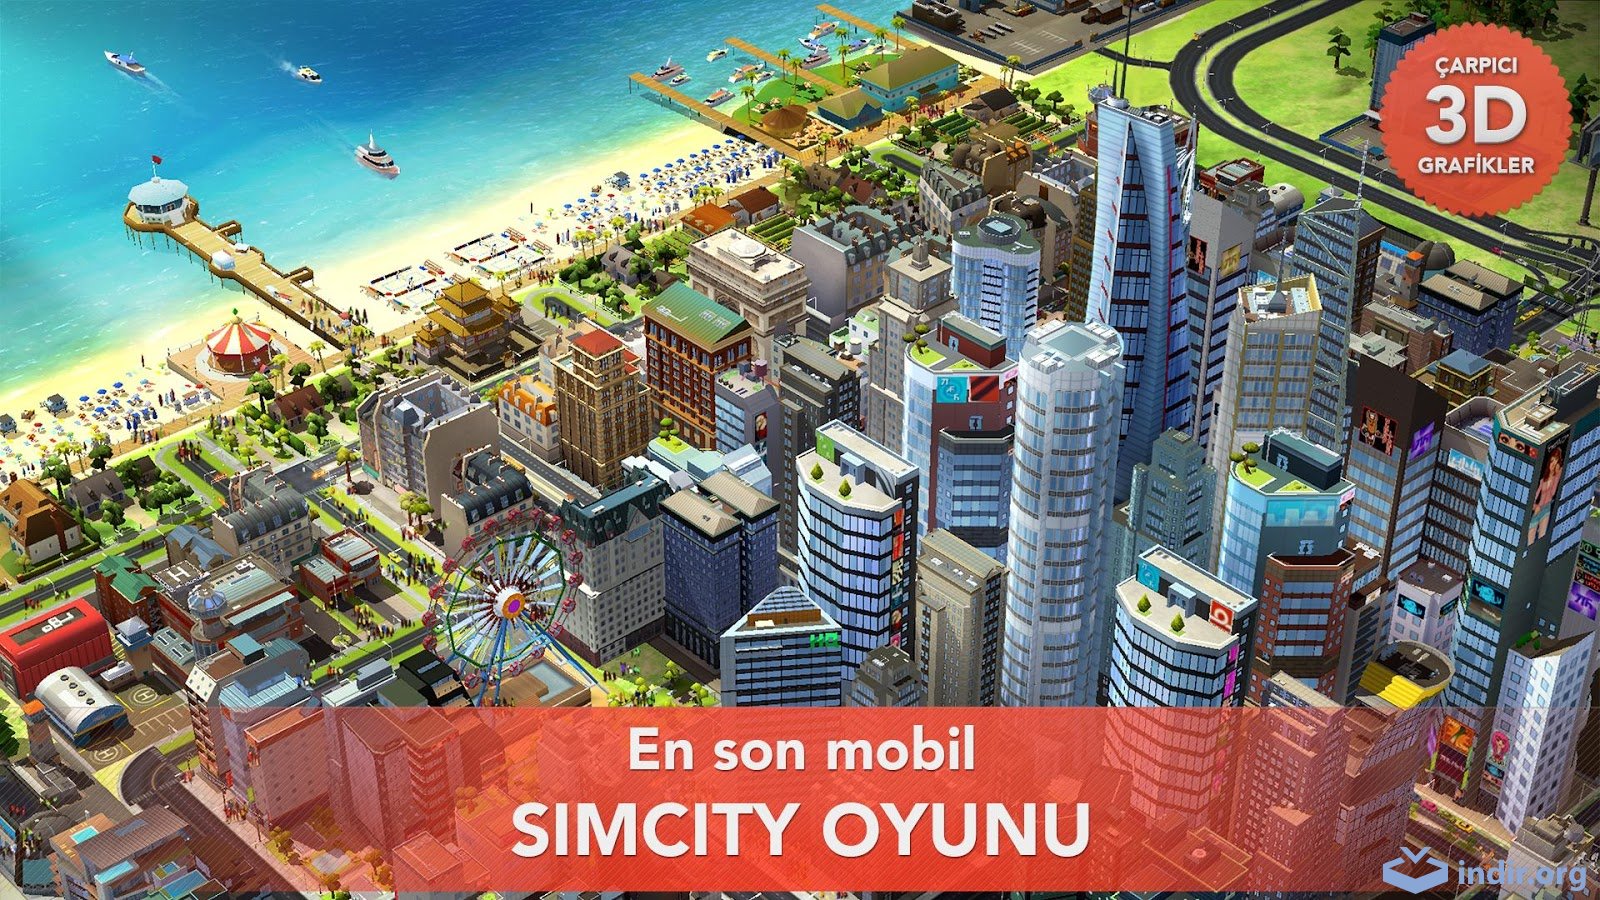 simcity 3000 for android free download